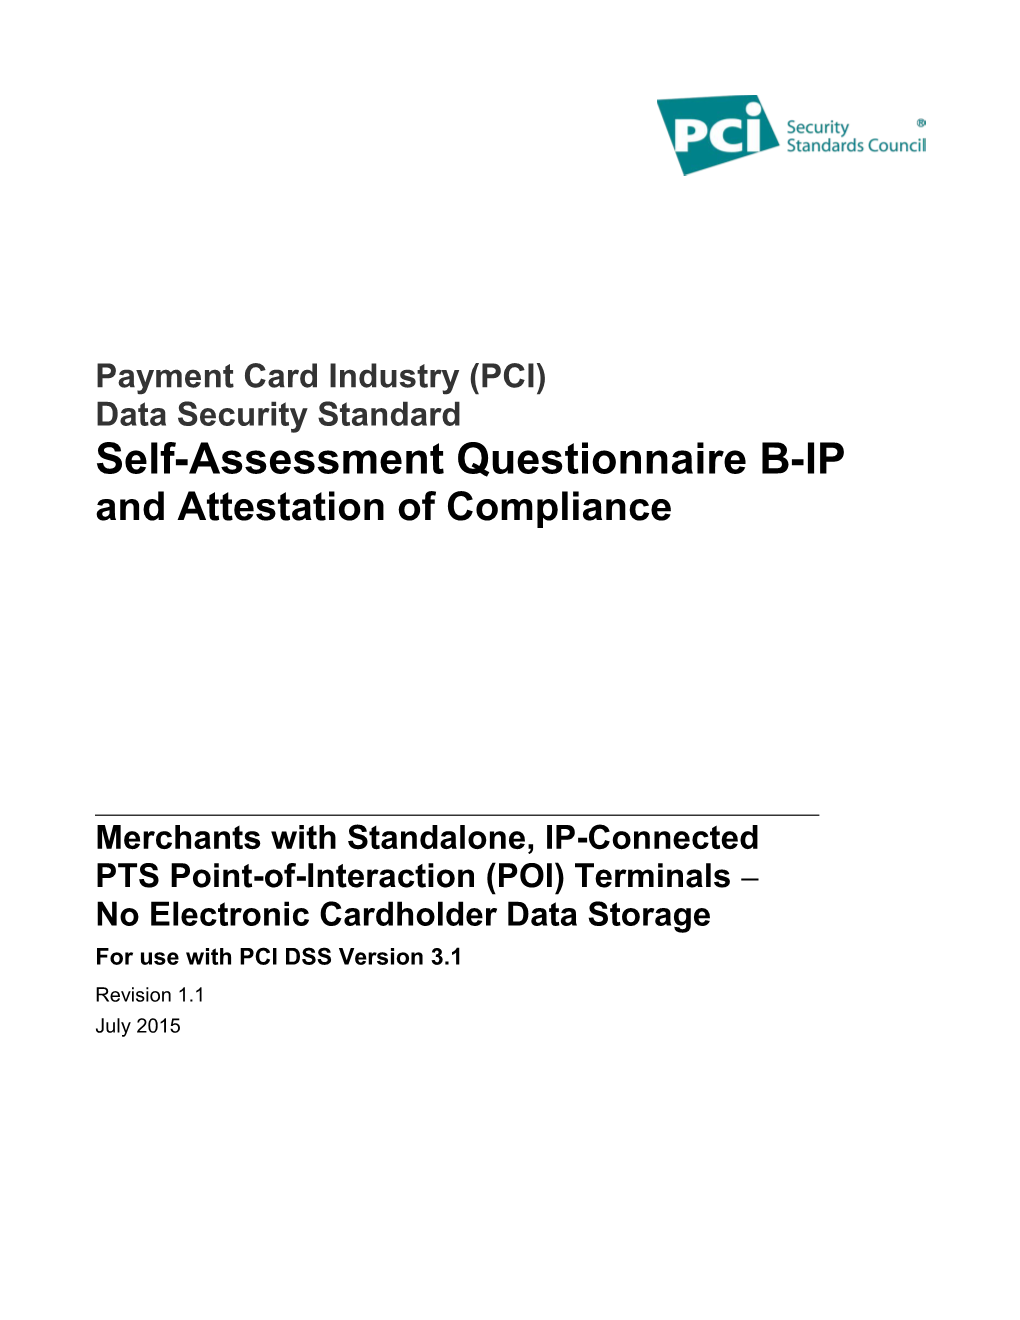 For Use with PCI DSS Version3.1